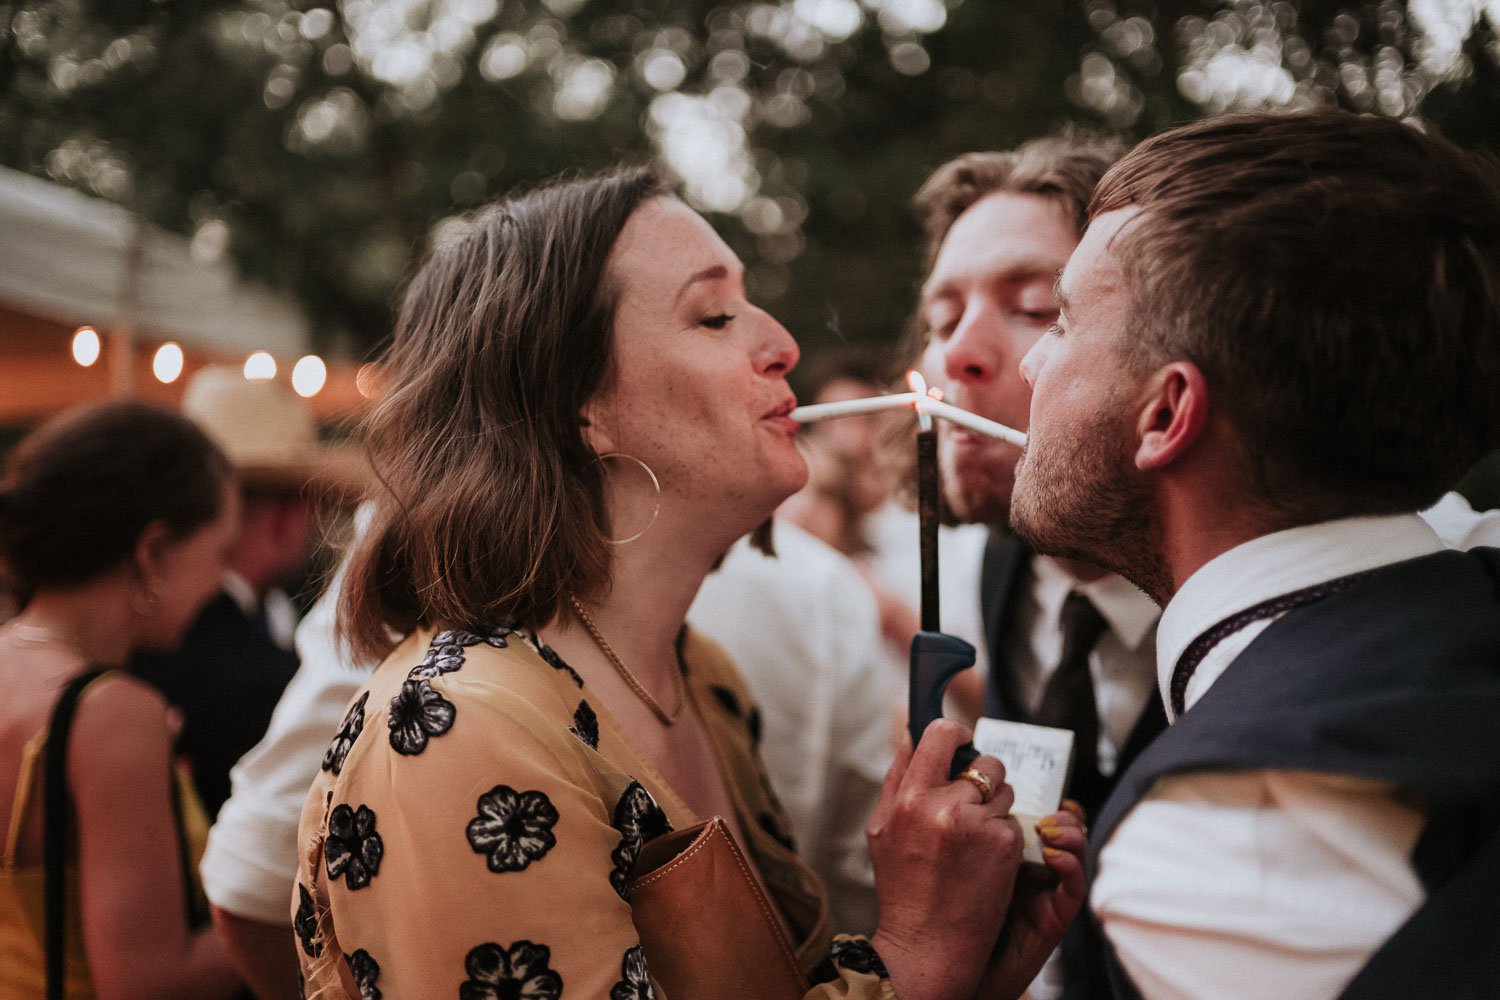 Guests light up cigarettes in celebration of the couple Texas Hill Country Ranch Wedding 